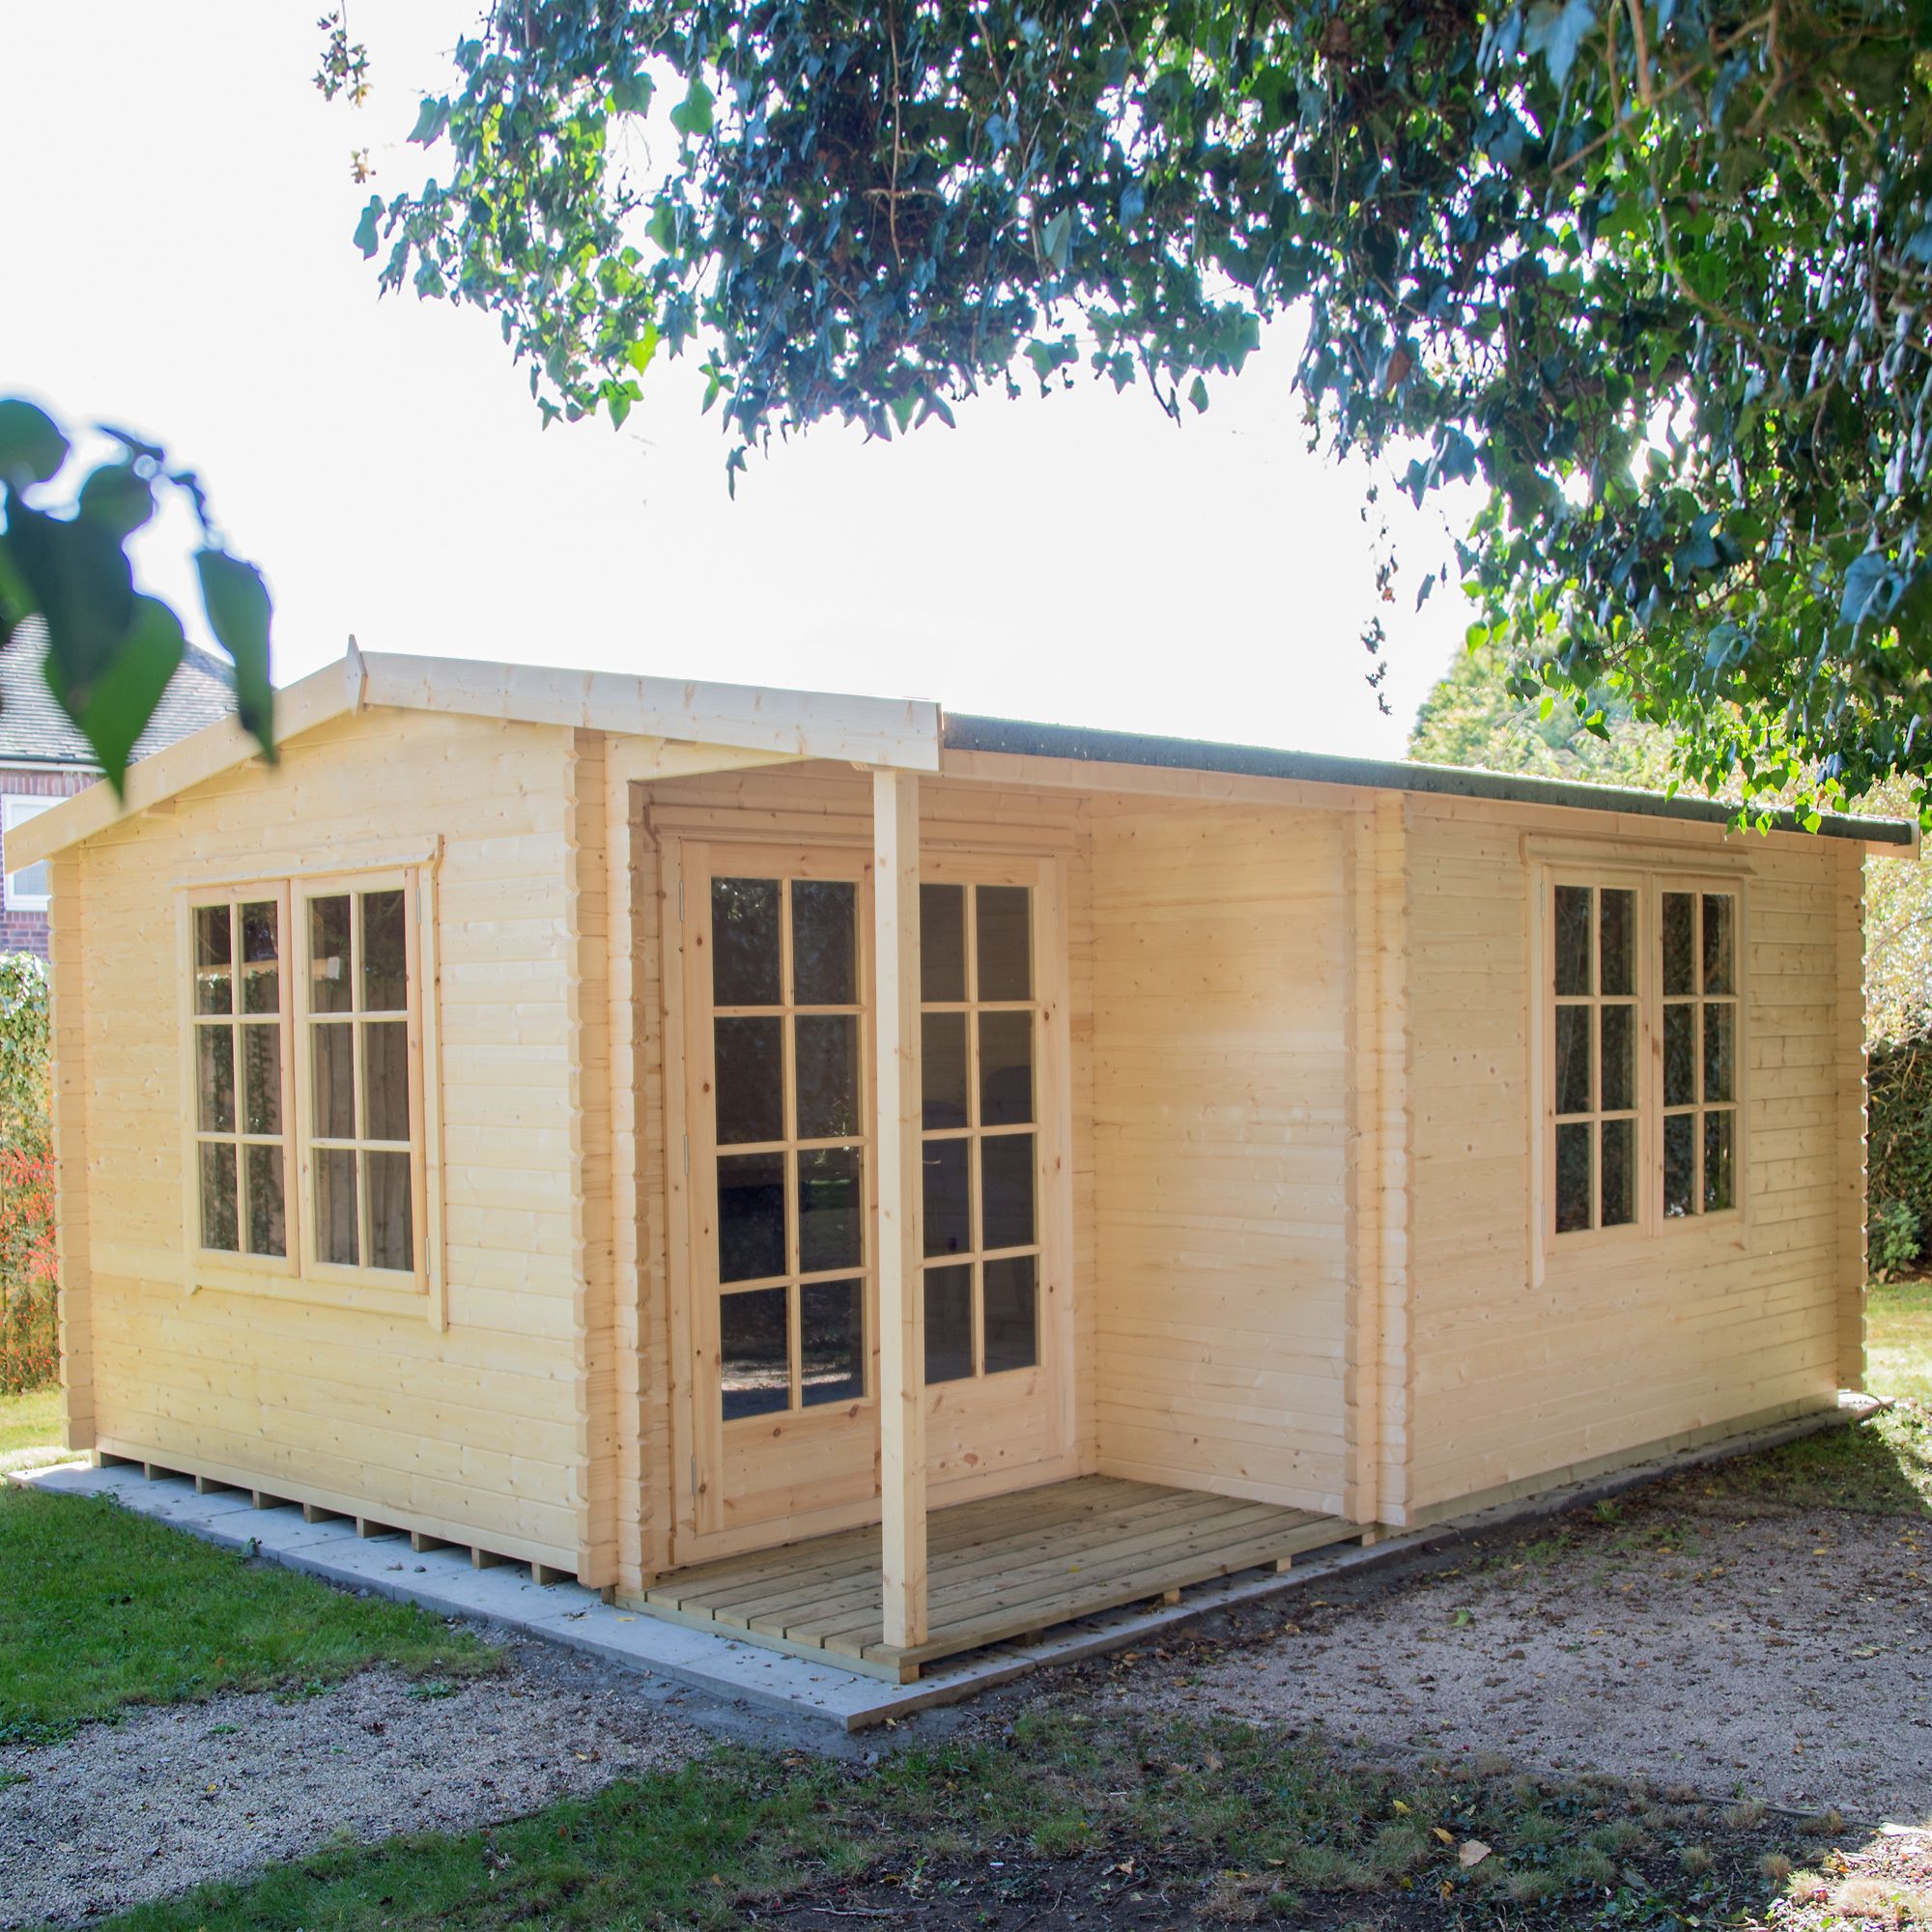 Shire Twyford 16x17 ft & 2 windows Apex Wooden Cabin with Felt tile roof - Assembly service included